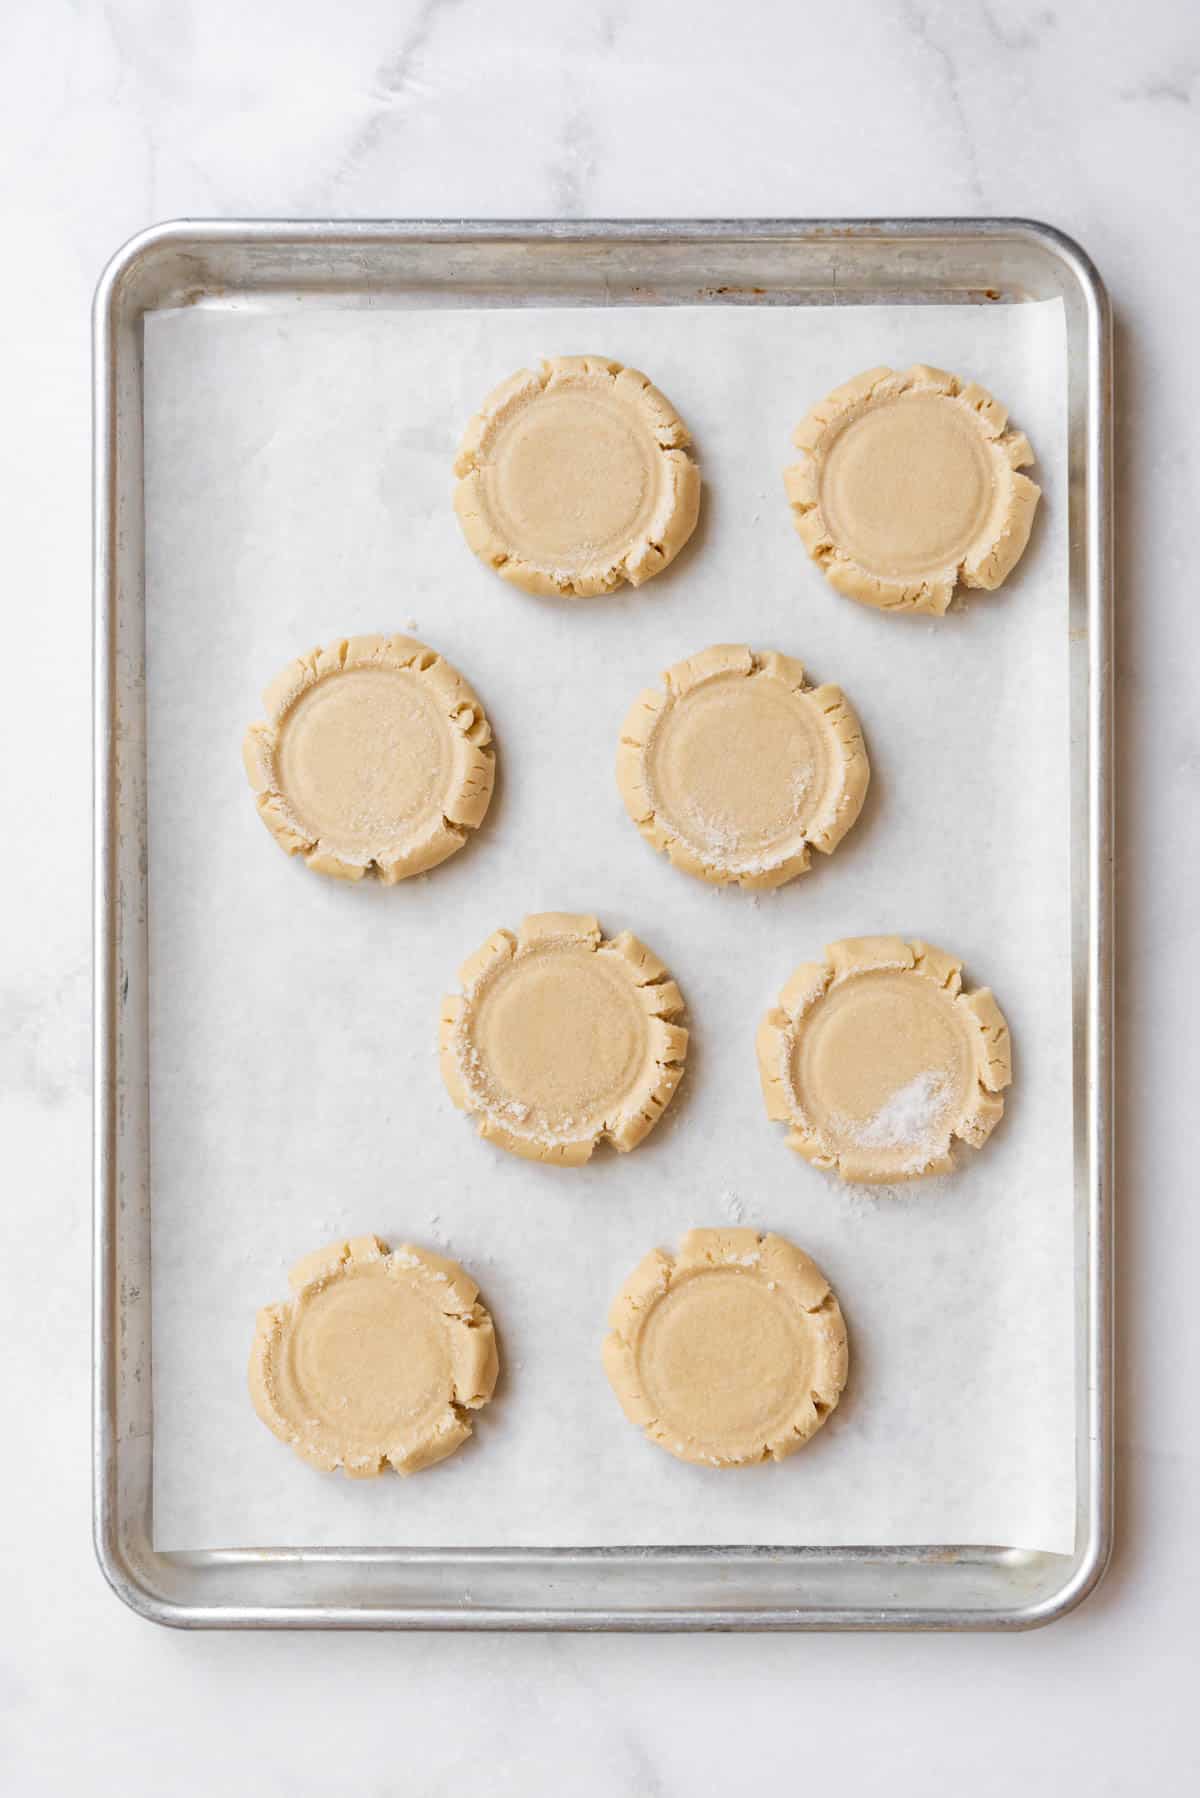 Unbaked sugar cookie dough on a baking sheet lined with parchment paper.